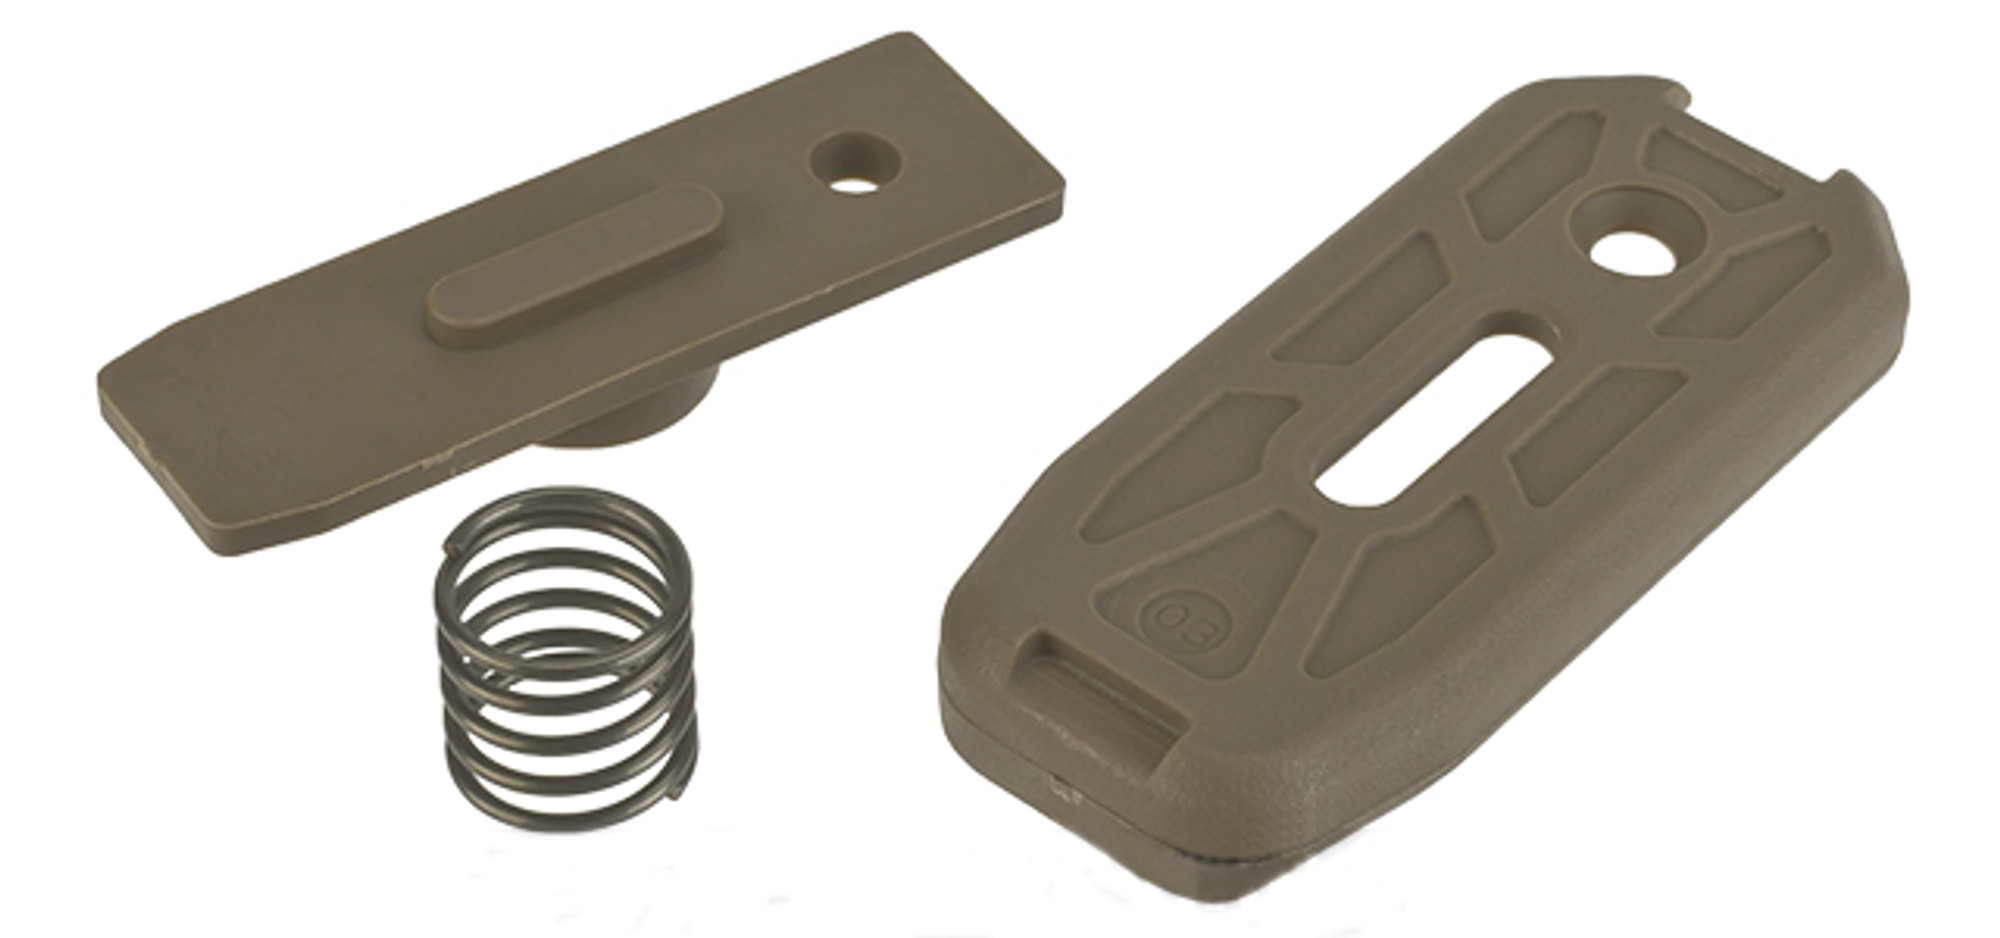 WE-Tech Replacement Magazine Plate for MSK / M4 / M16 Series Airsoft GBB Rifles - Part# 137 / 138 / 139 (Tan)